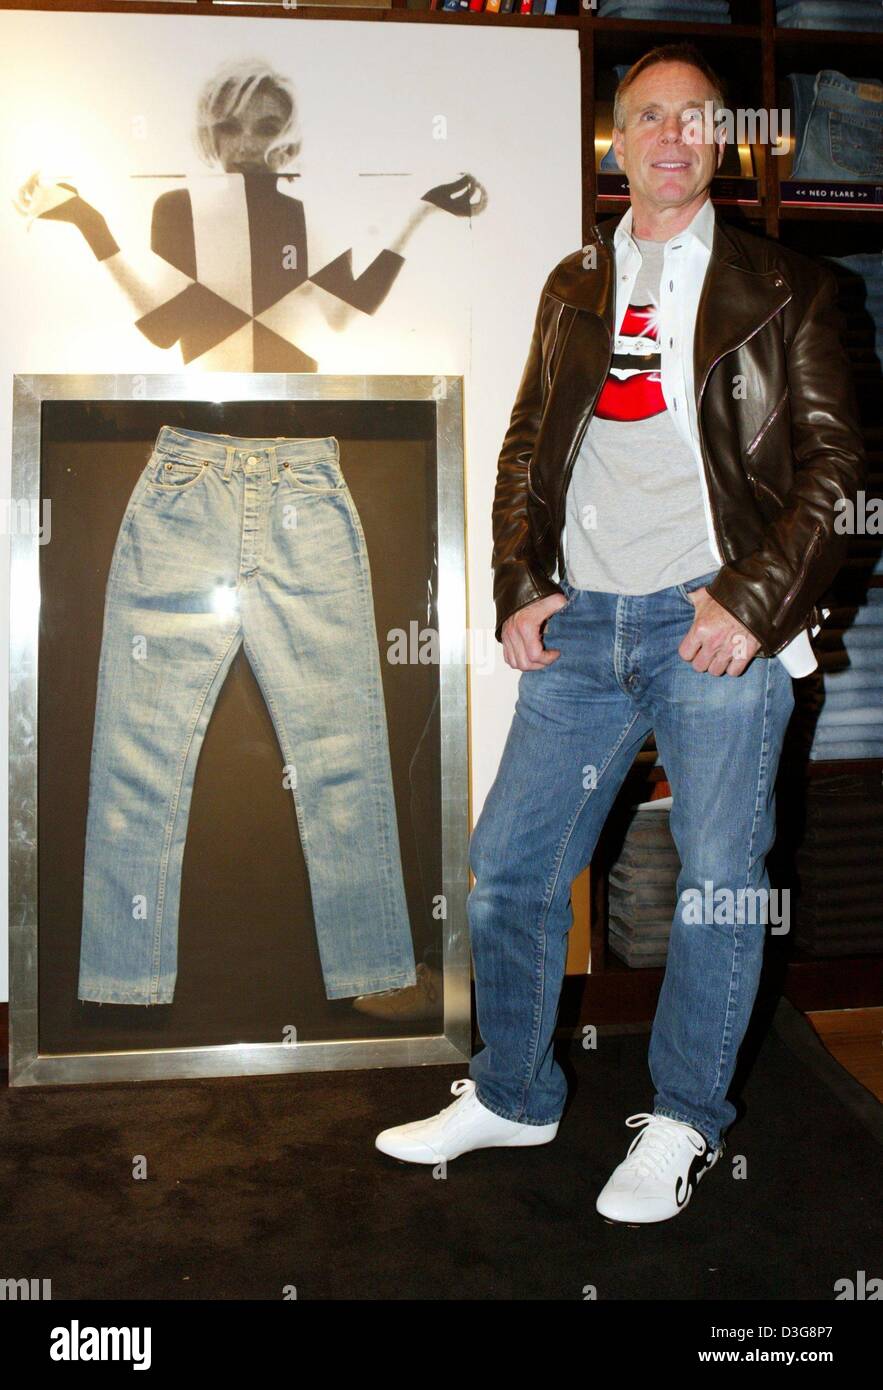 dpa) - US fashion designer Tommy Hilfiger poses next to a jeans of Marilyn  Monroe, at his shop on Kuerfuerstendamm in Berlin, 14 October 2003. At the  shop he opened an exhibition